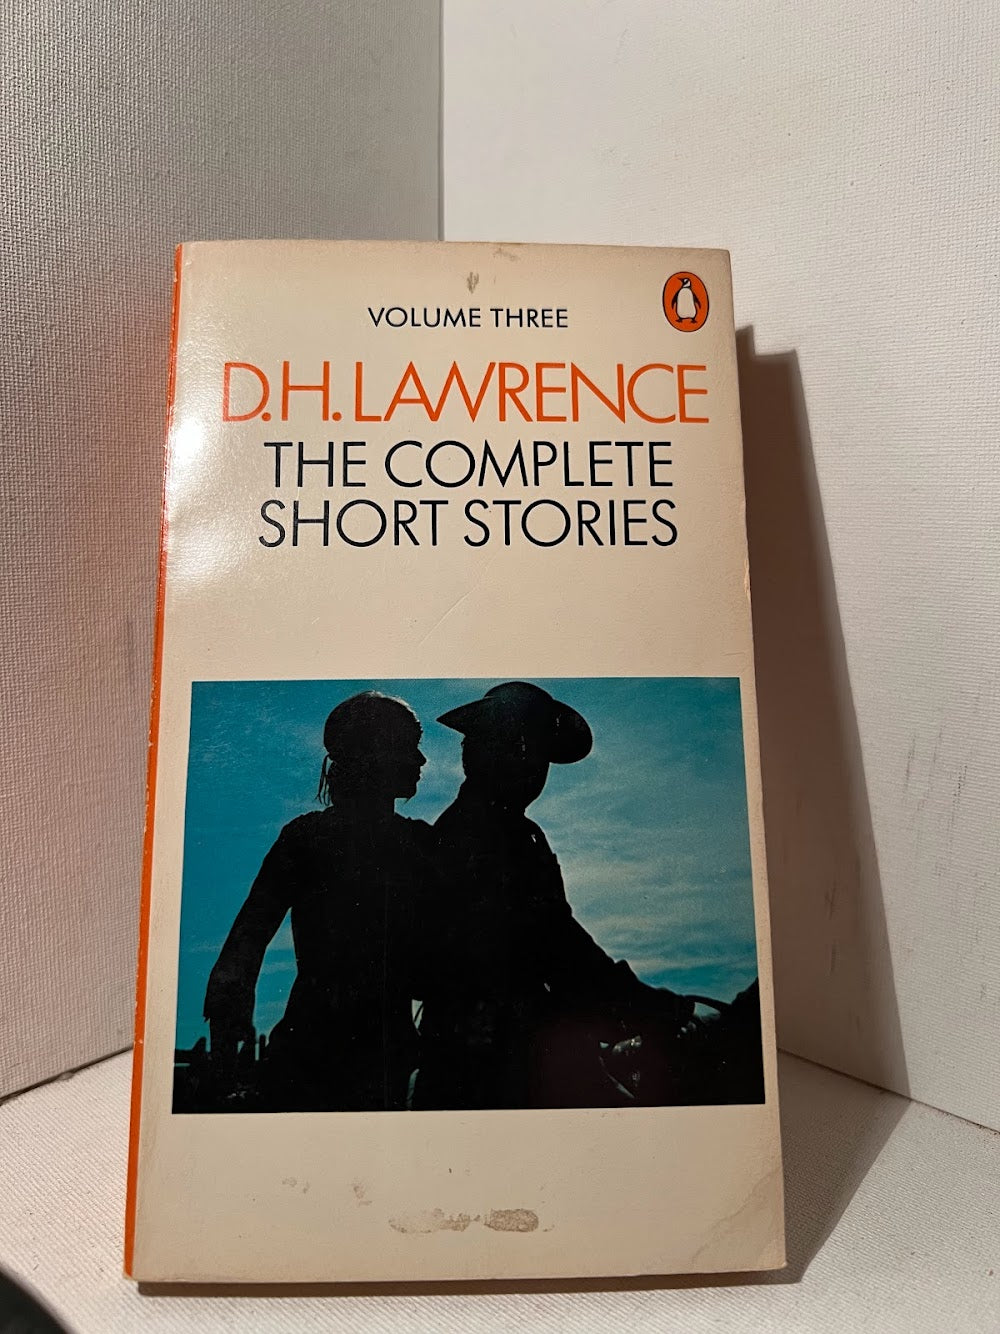 The Complete Short Stories by D.H. Lawrence